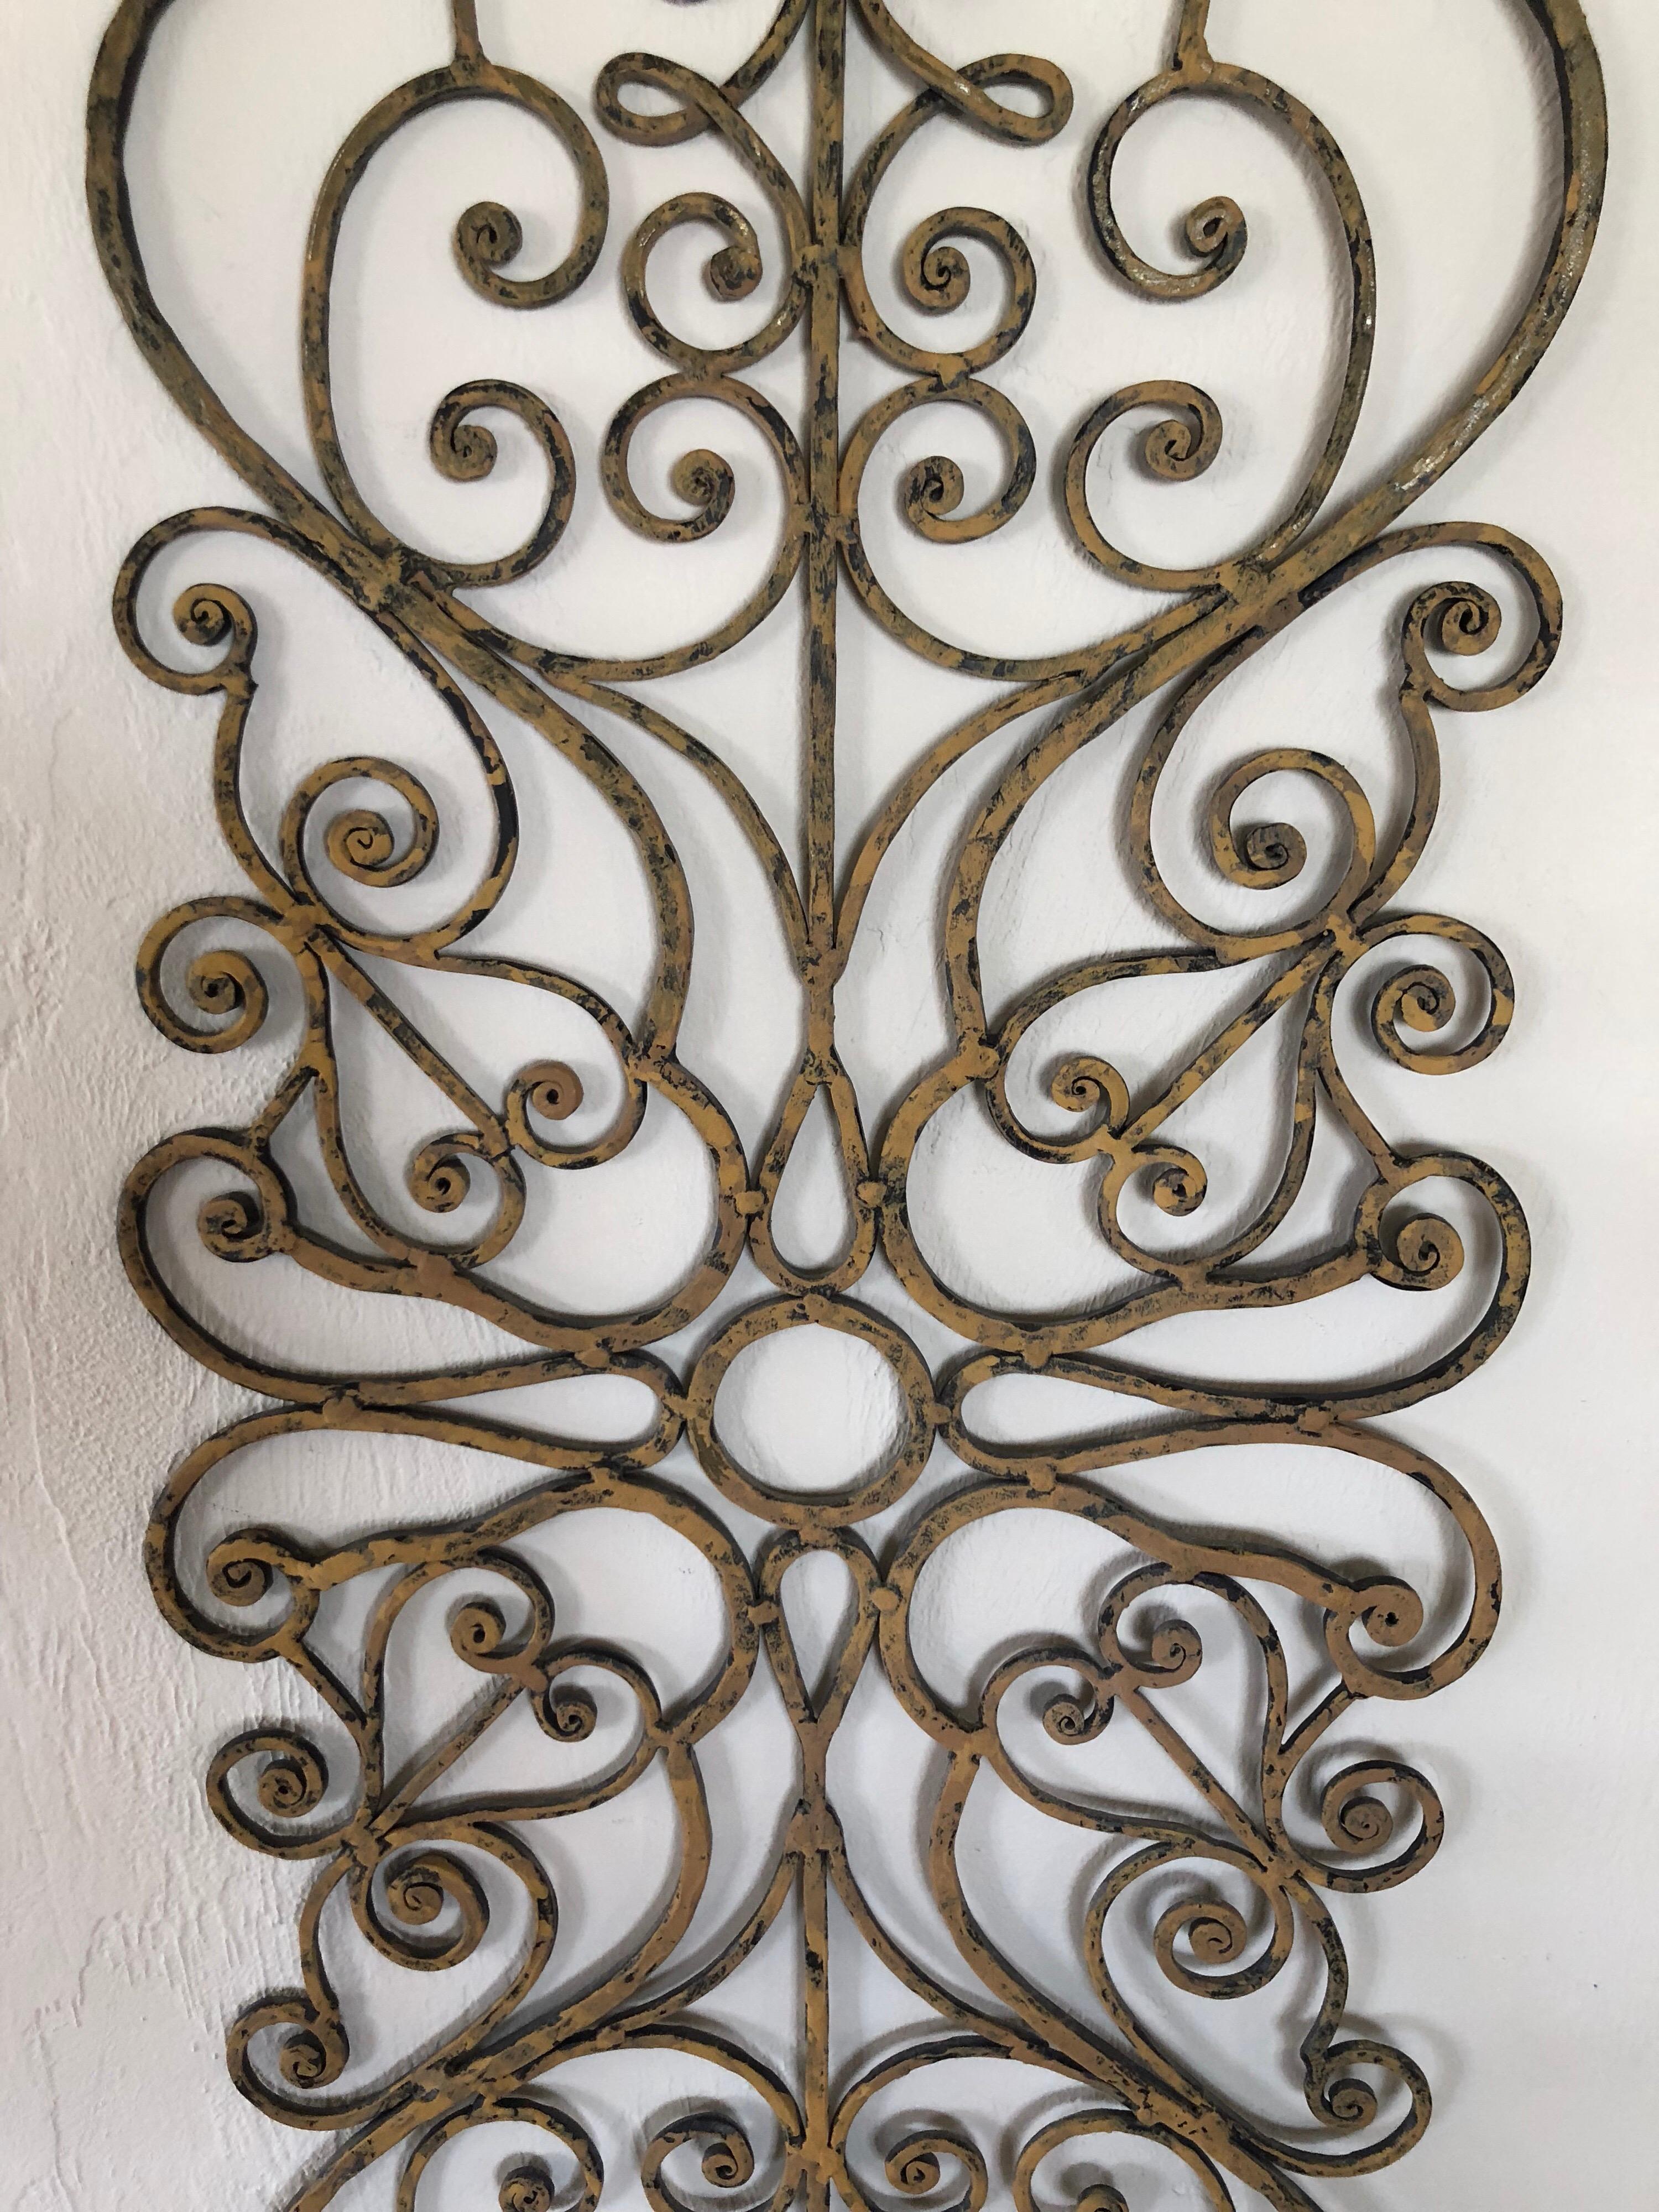 Large Hand-Wrought Iron Wall Sculpture 9